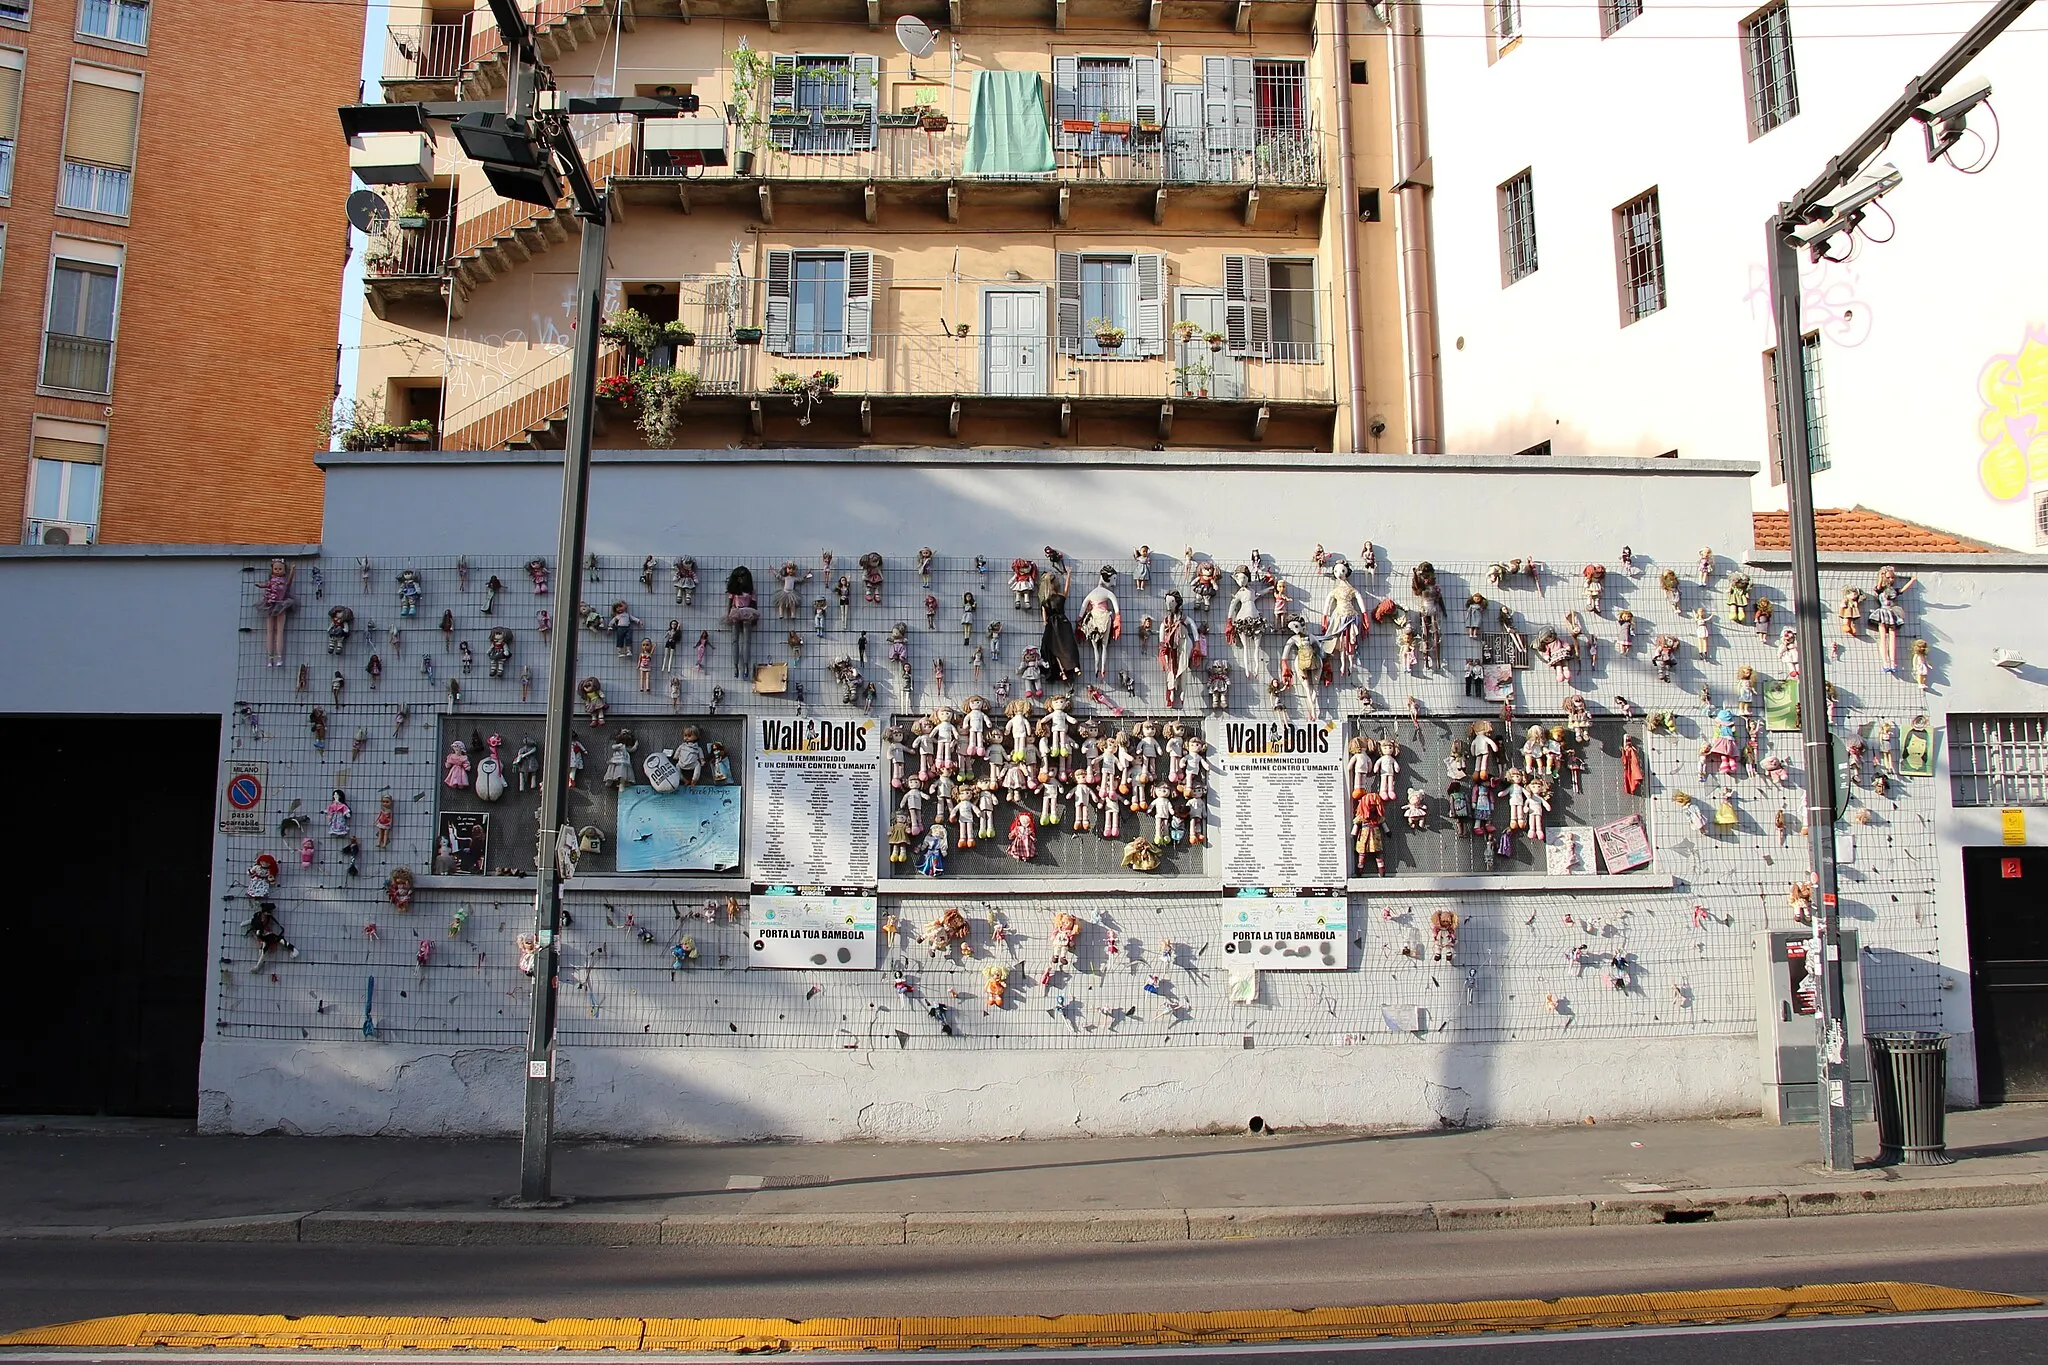 Photo showing: Ticinese - Via Edmondo de Amicis
"The Wall of Dolls" exhibit in Milan was unveiled to help shine a light on the increasing violence against women.

International fashion brands and designers created dolls for the wall.